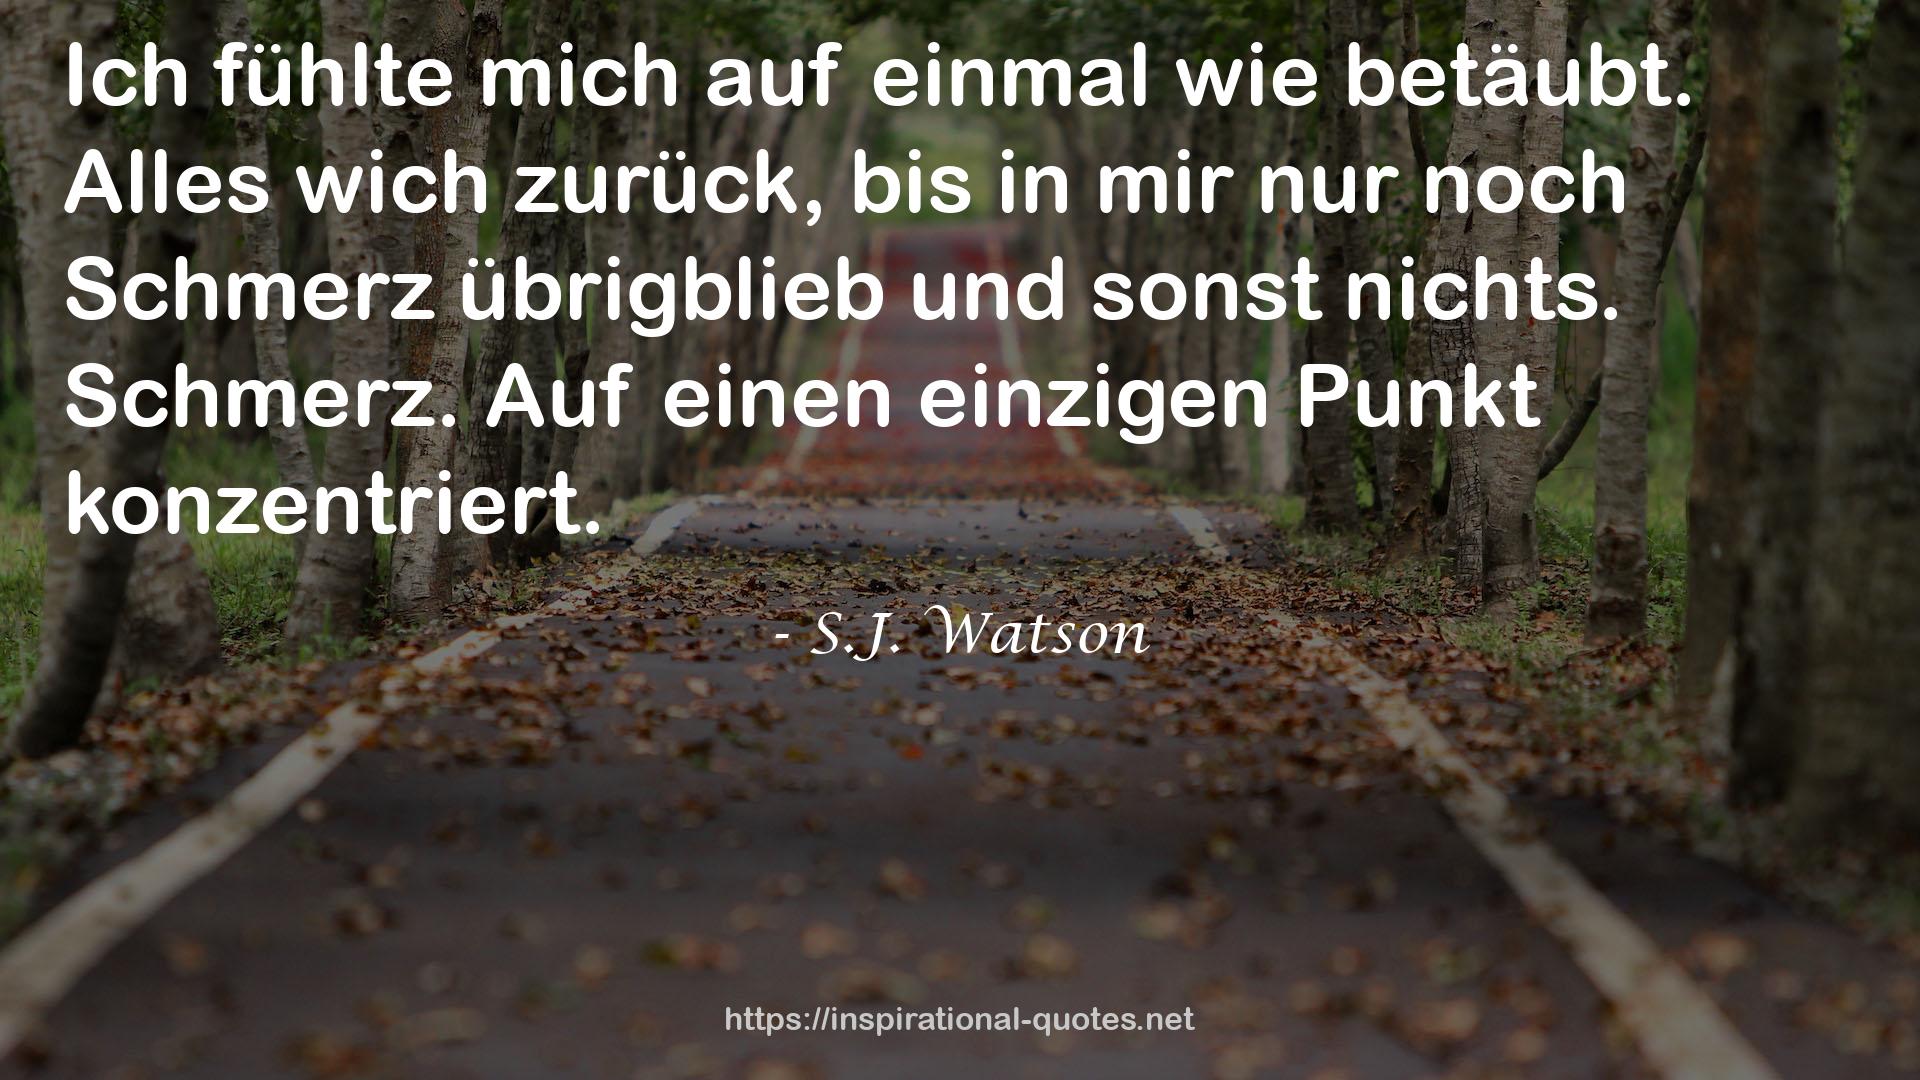 S.J. Watson QUOTES